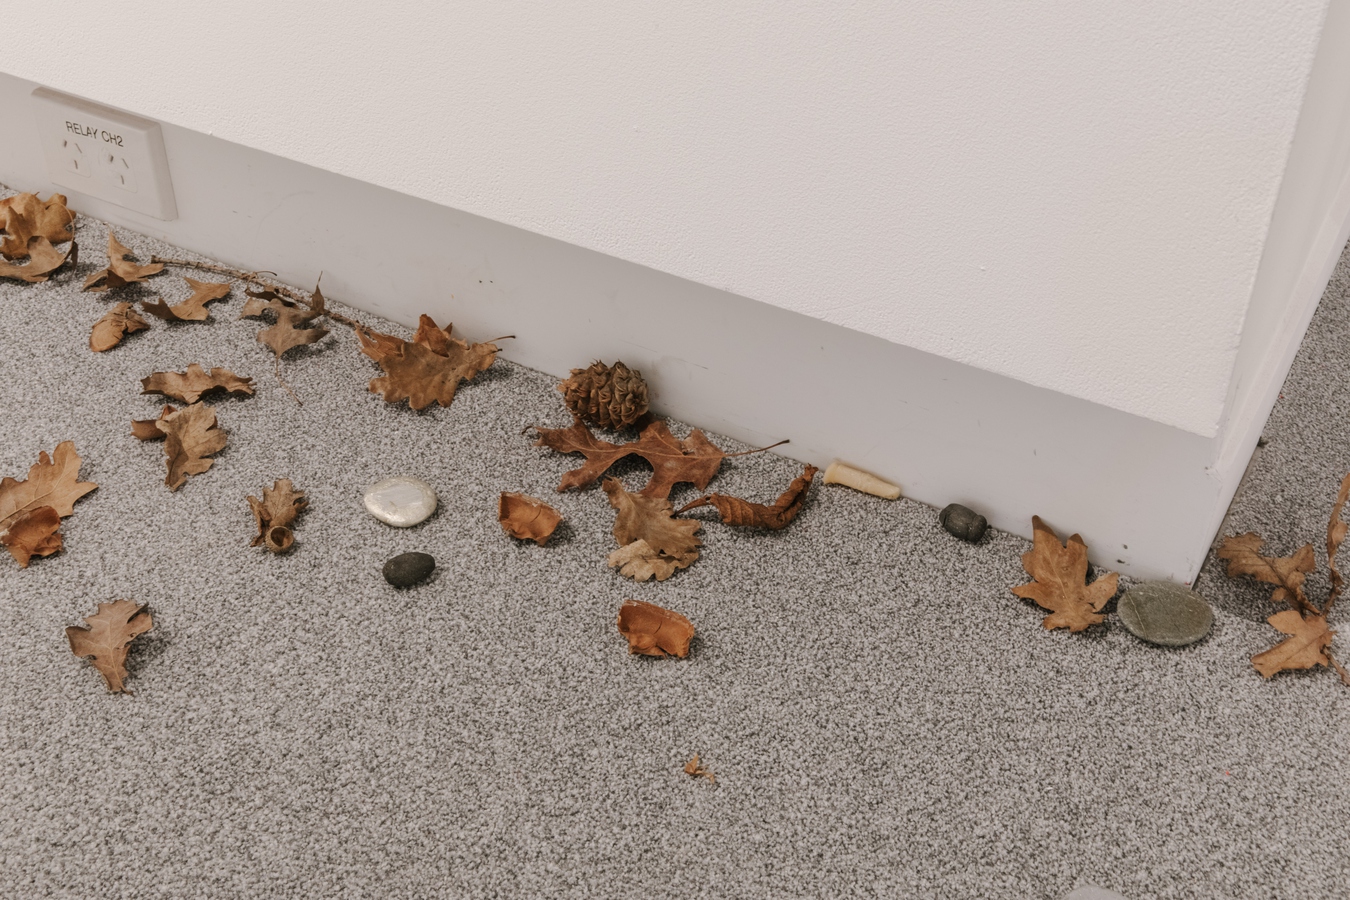 Image: Yukari Kaihori, The Stepping Stones (detail), 2022. Fired recycled glass tiles, recycled clay tiles with wood-ash glaze, wax, pewter, clay, aluminium, agate, found objects, ash painting. Photo by Nancy Zhou.